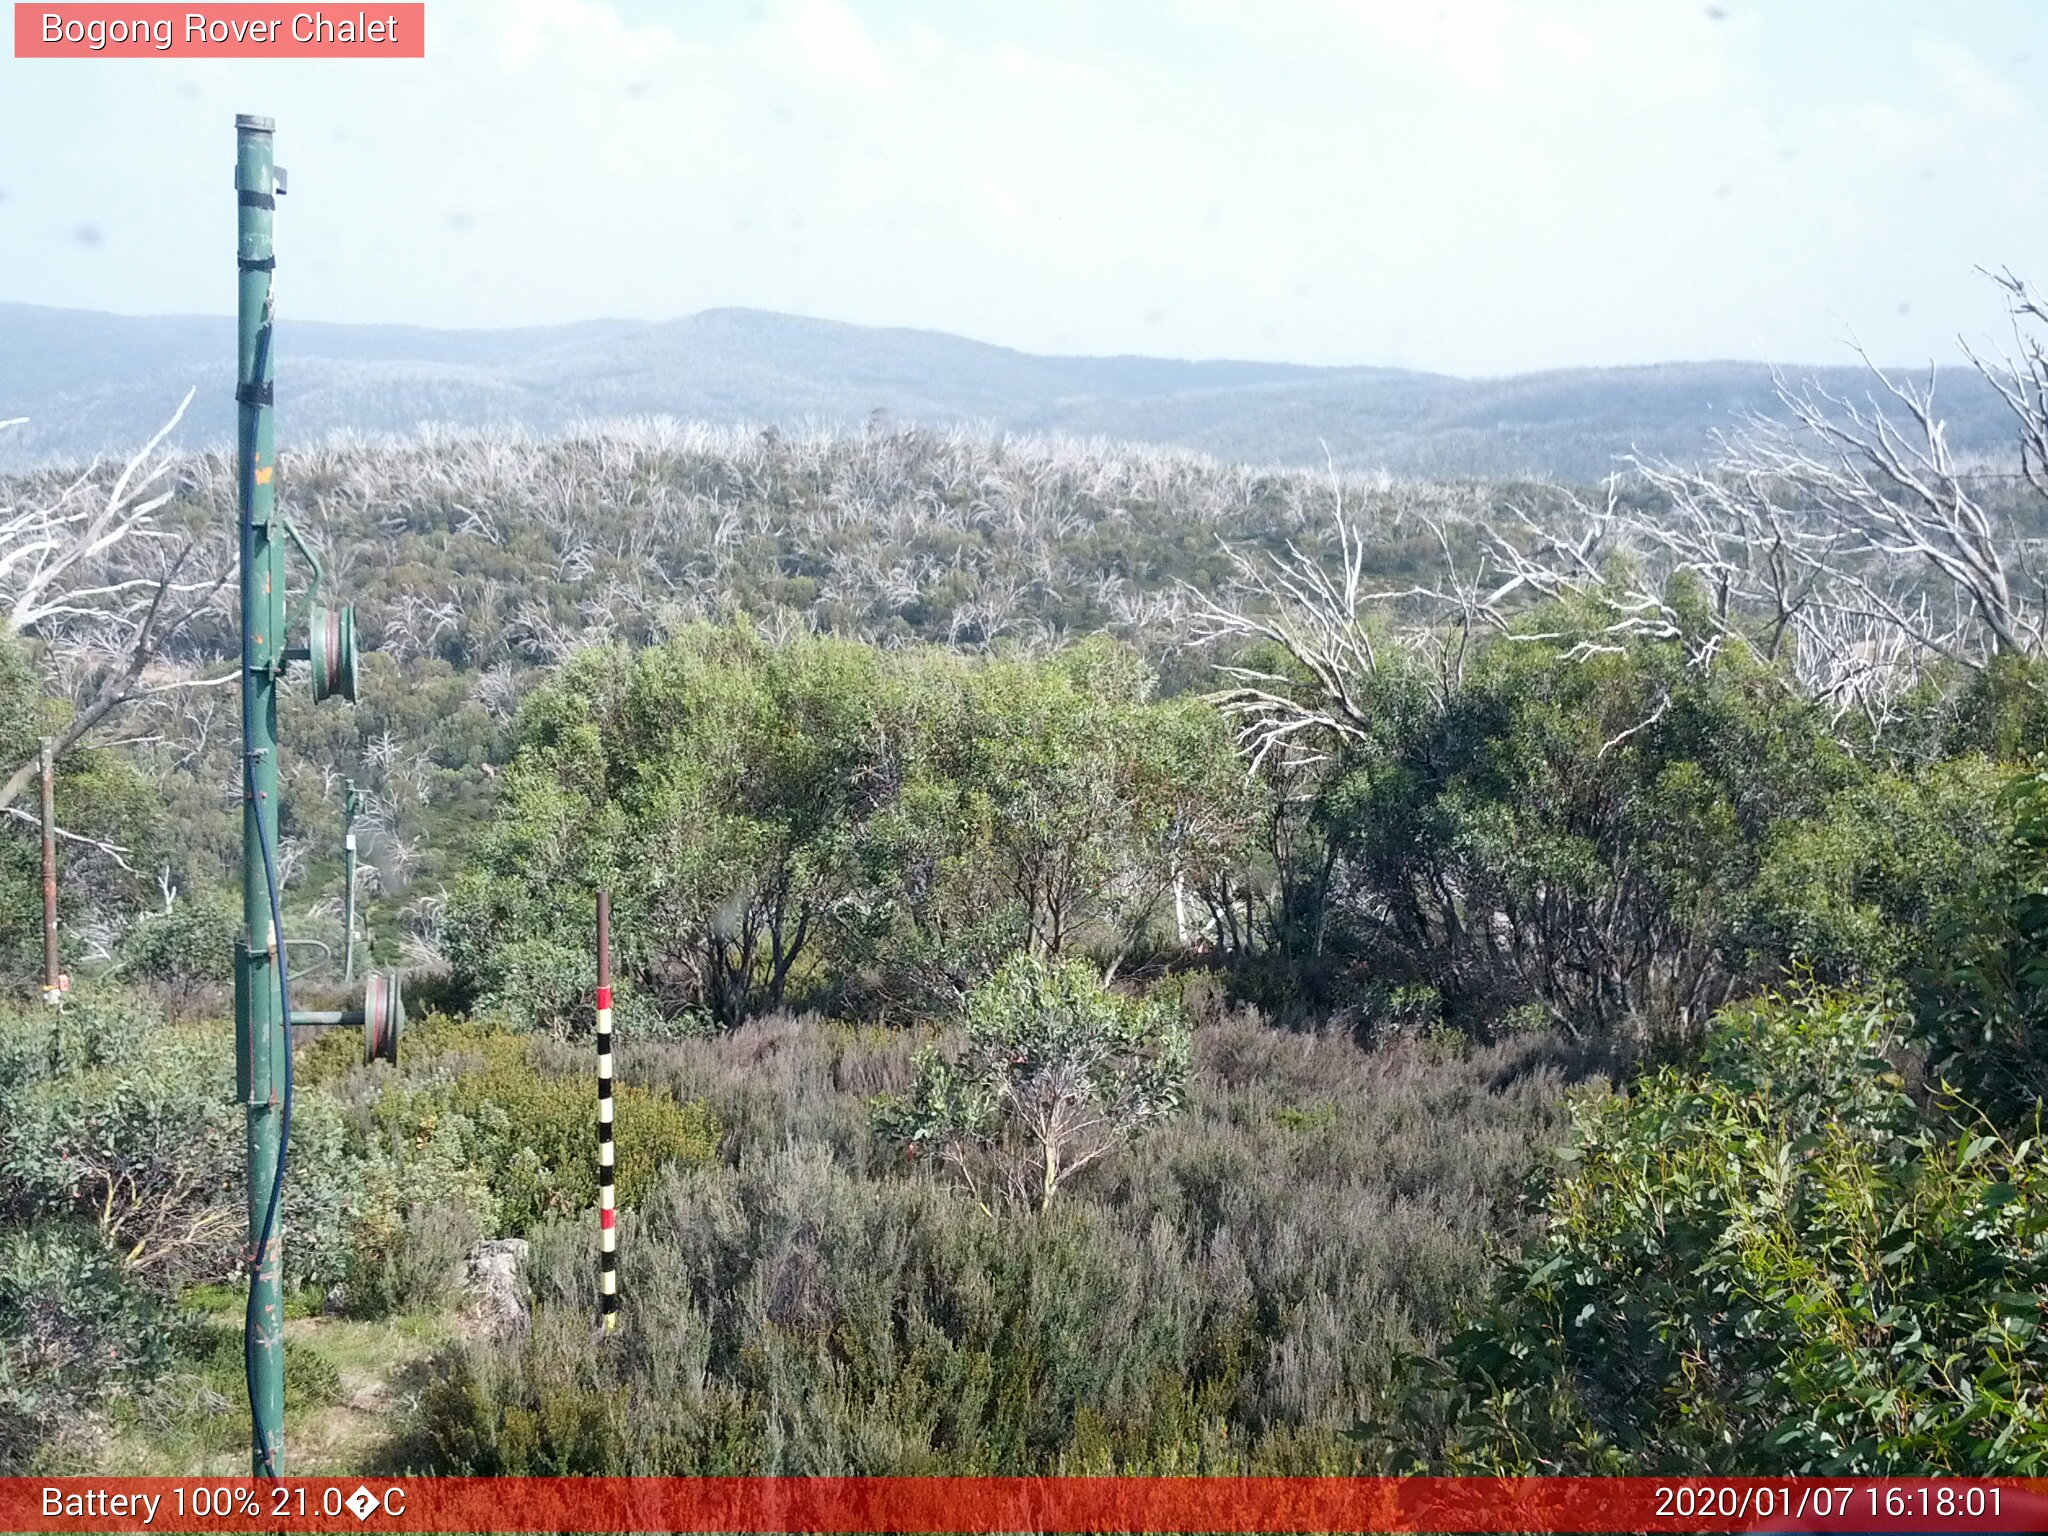 Bogong Web Cam 4:18pm Tuesday 7th of January 2020